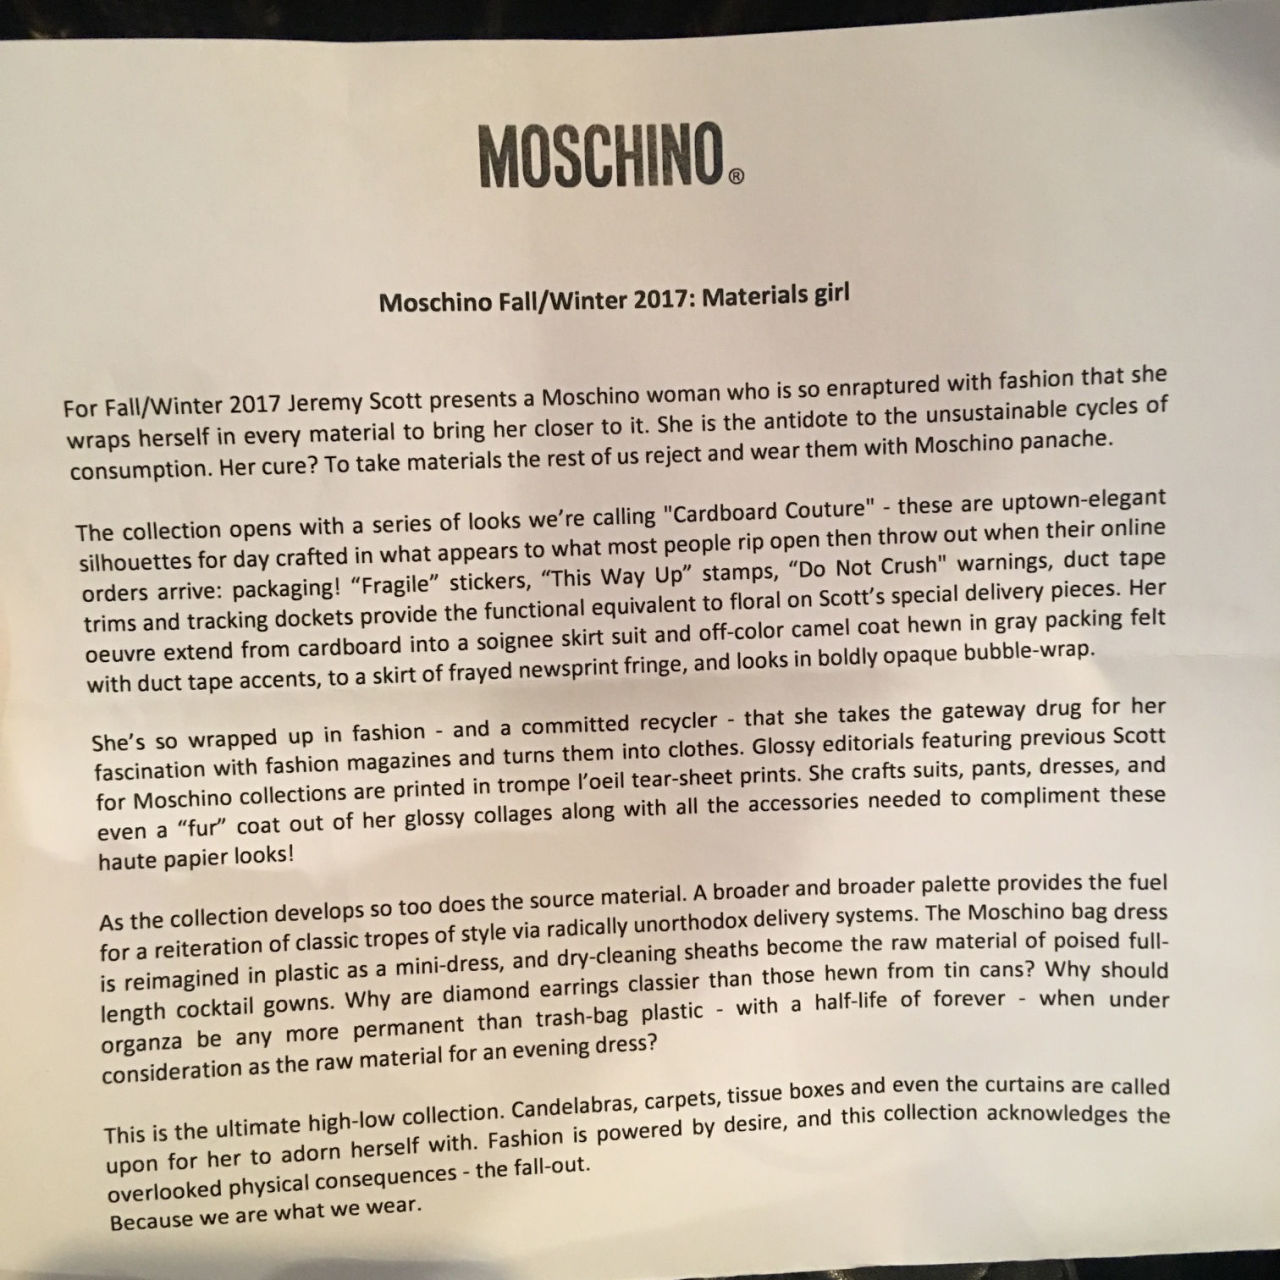 show notes for Moschino one of the Fashion Week Terms